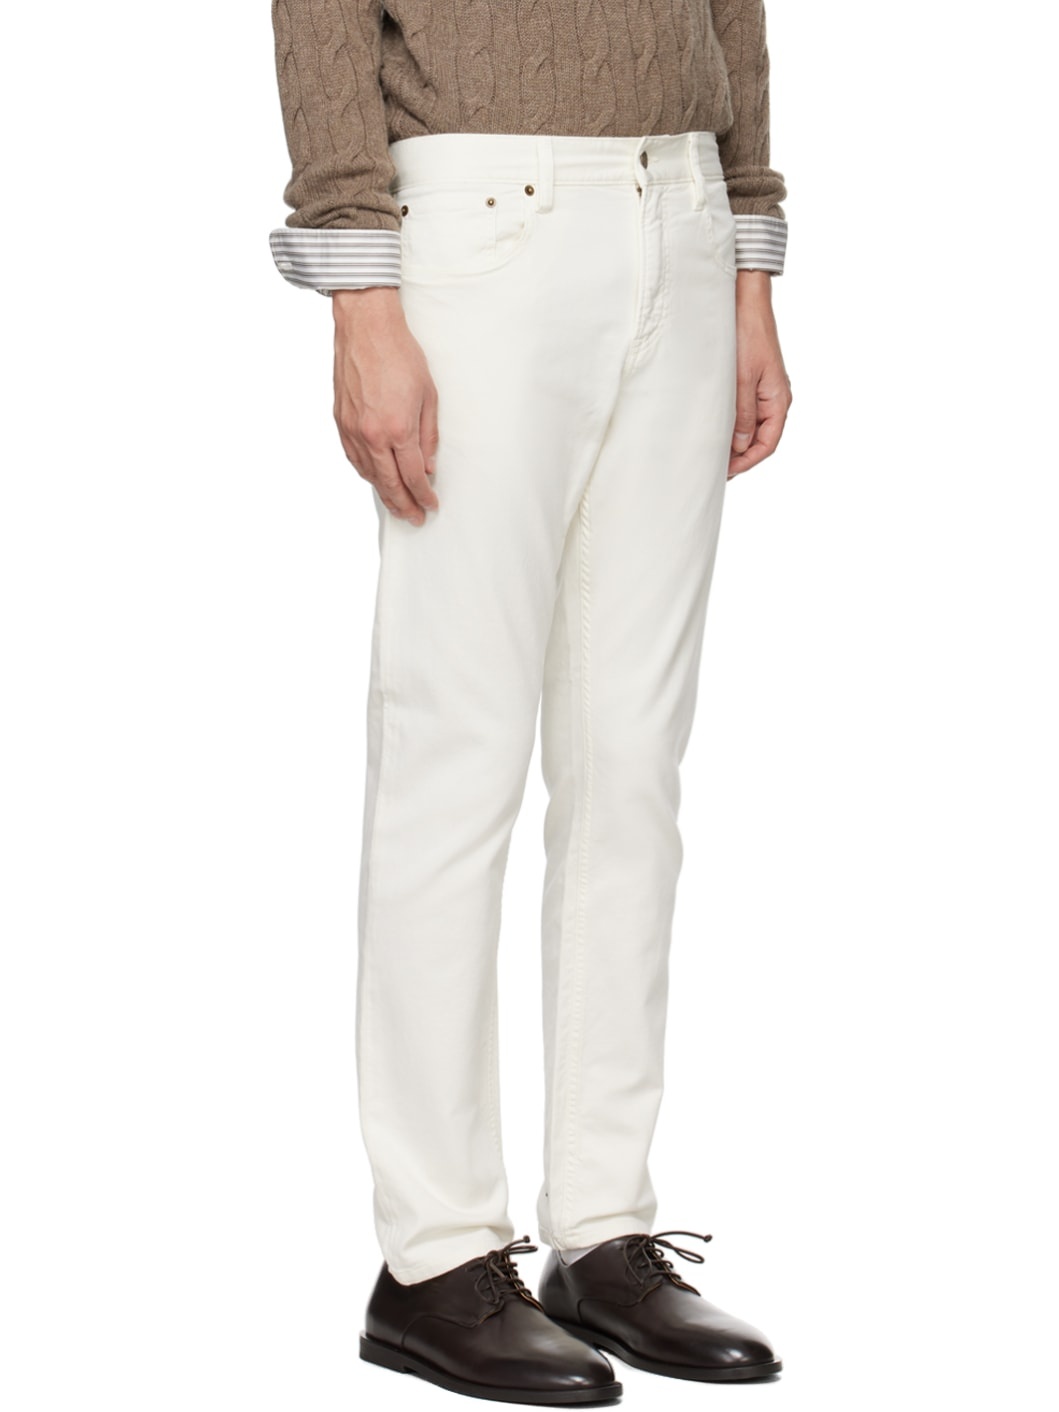 Off-White Slim-Fit Trousers - 2